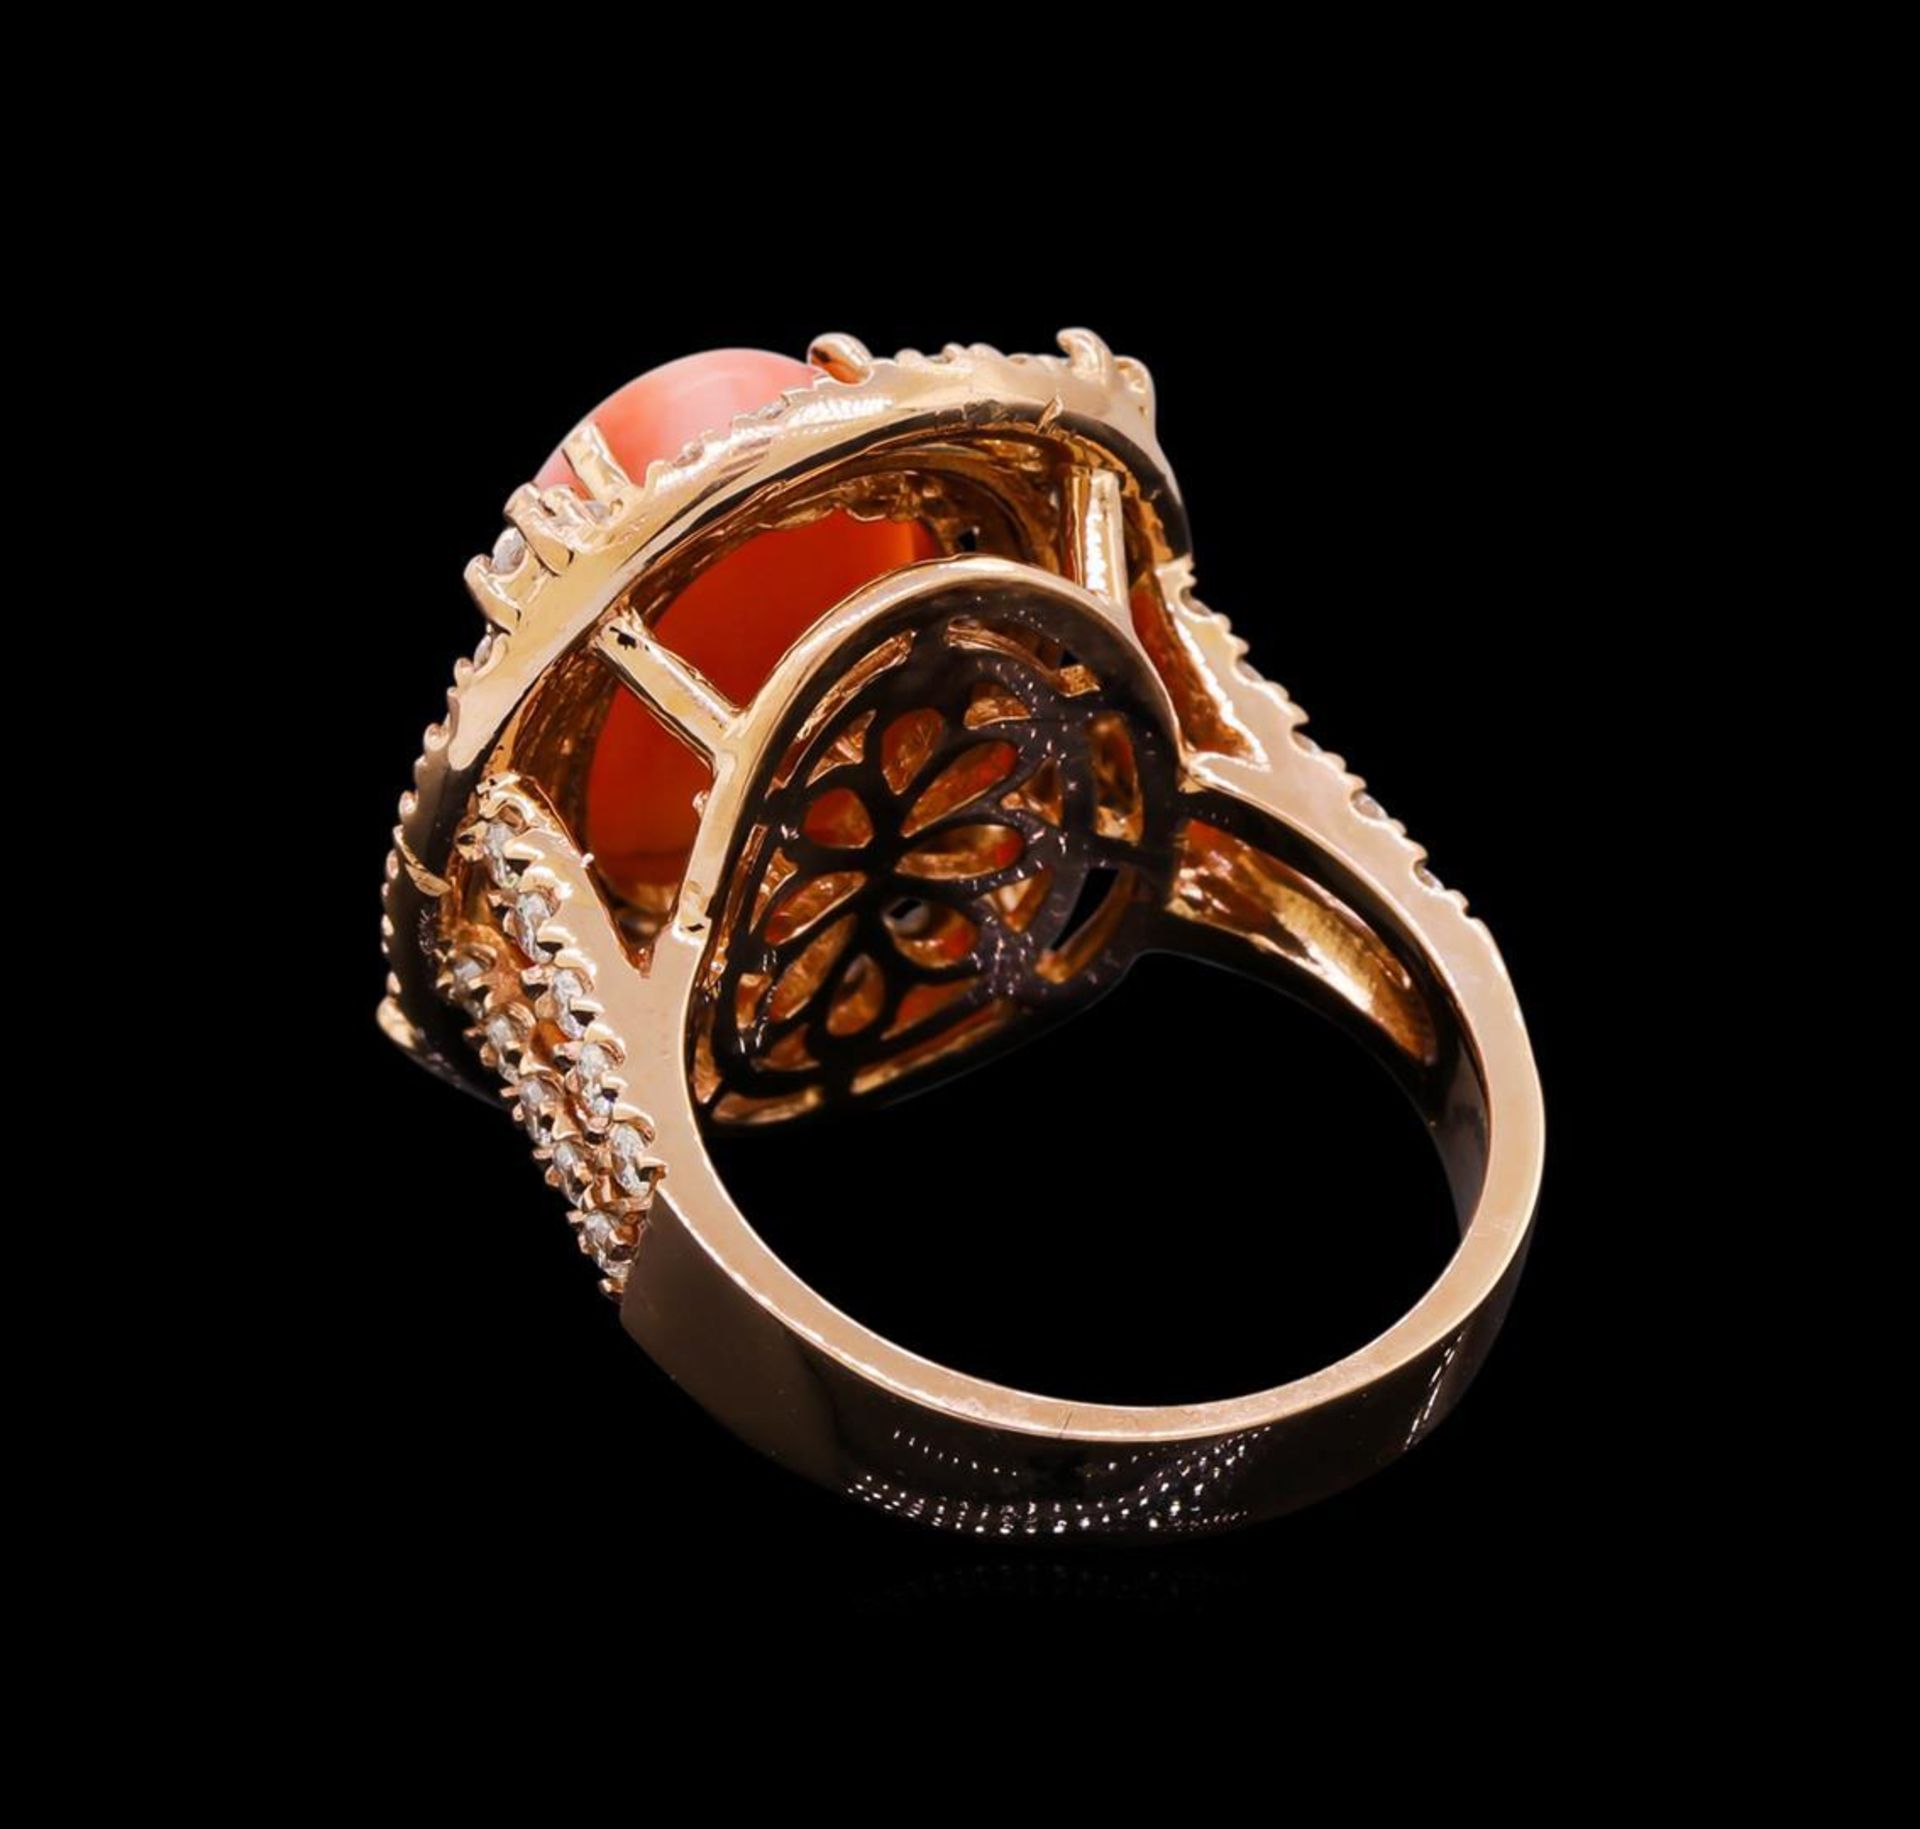 5.89 ctw Pink Coral and Diamond Ring - 14KT Rose Gold - Image 3 of 6